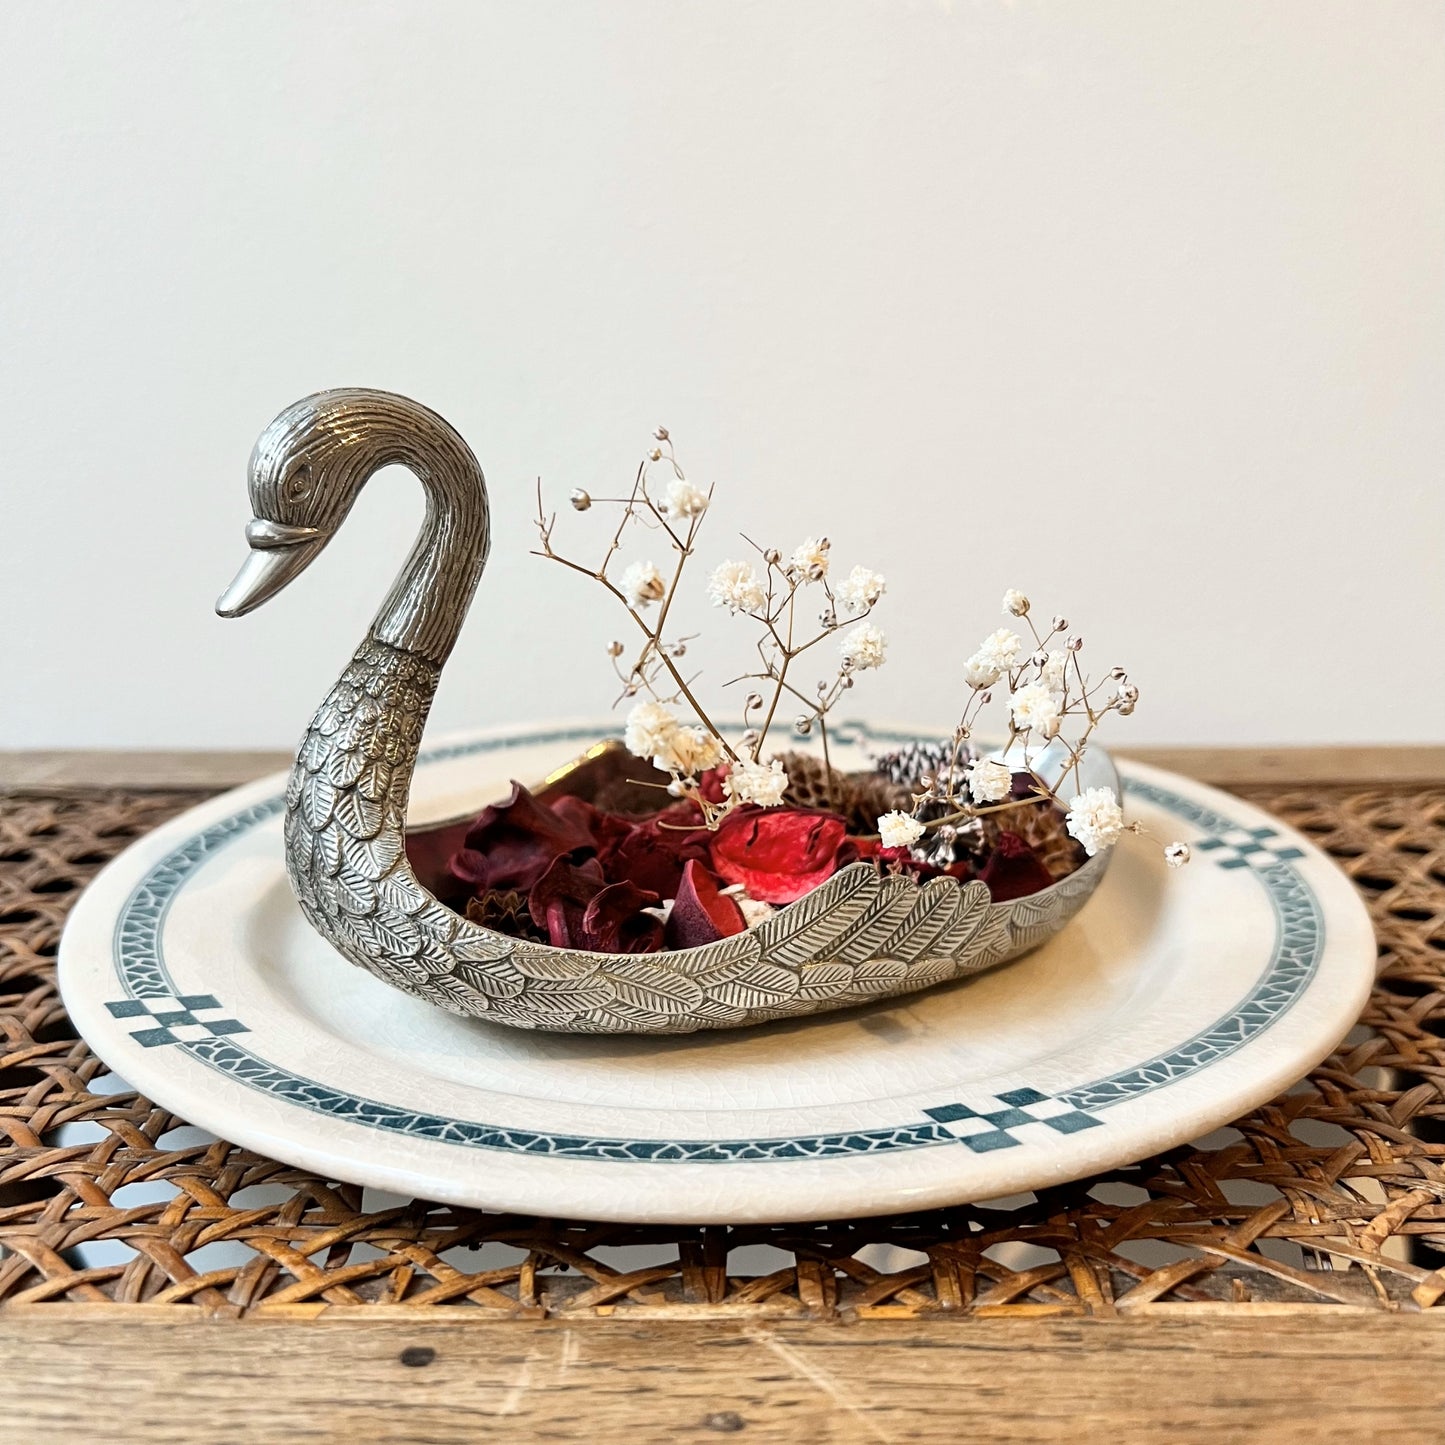 【Vintage】France - 1920-50s Swan Tray